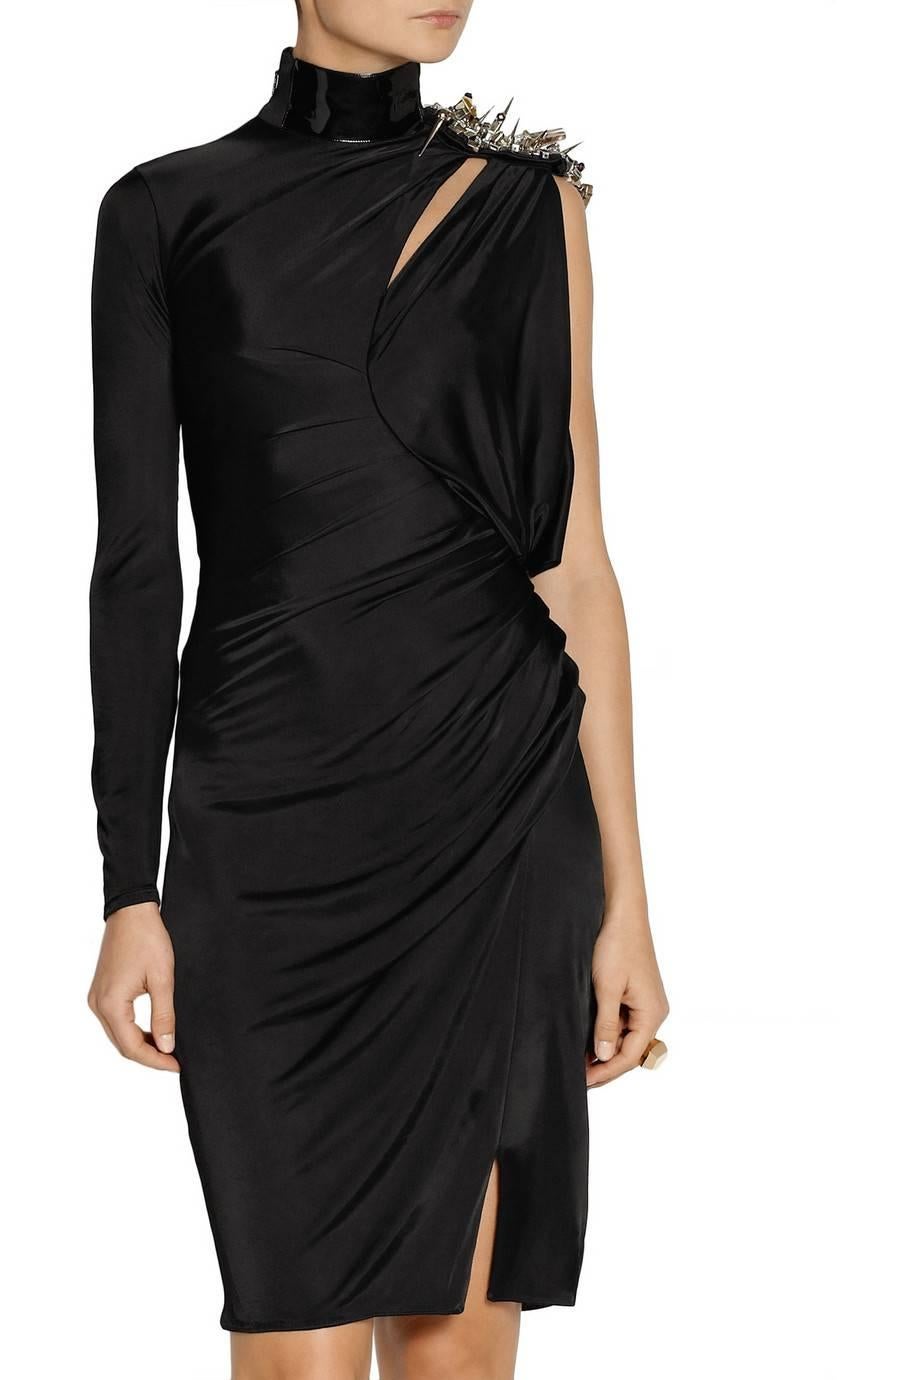  BRAND NEW VERSACE DRESS

This darkly glamorous piece is trimmed with metallic beads, crystals and a patent-leather collar. 

The wrap-effect waist gives it a flattering drape.

Black jersey

- Black patent-leather collar, bead and crystal